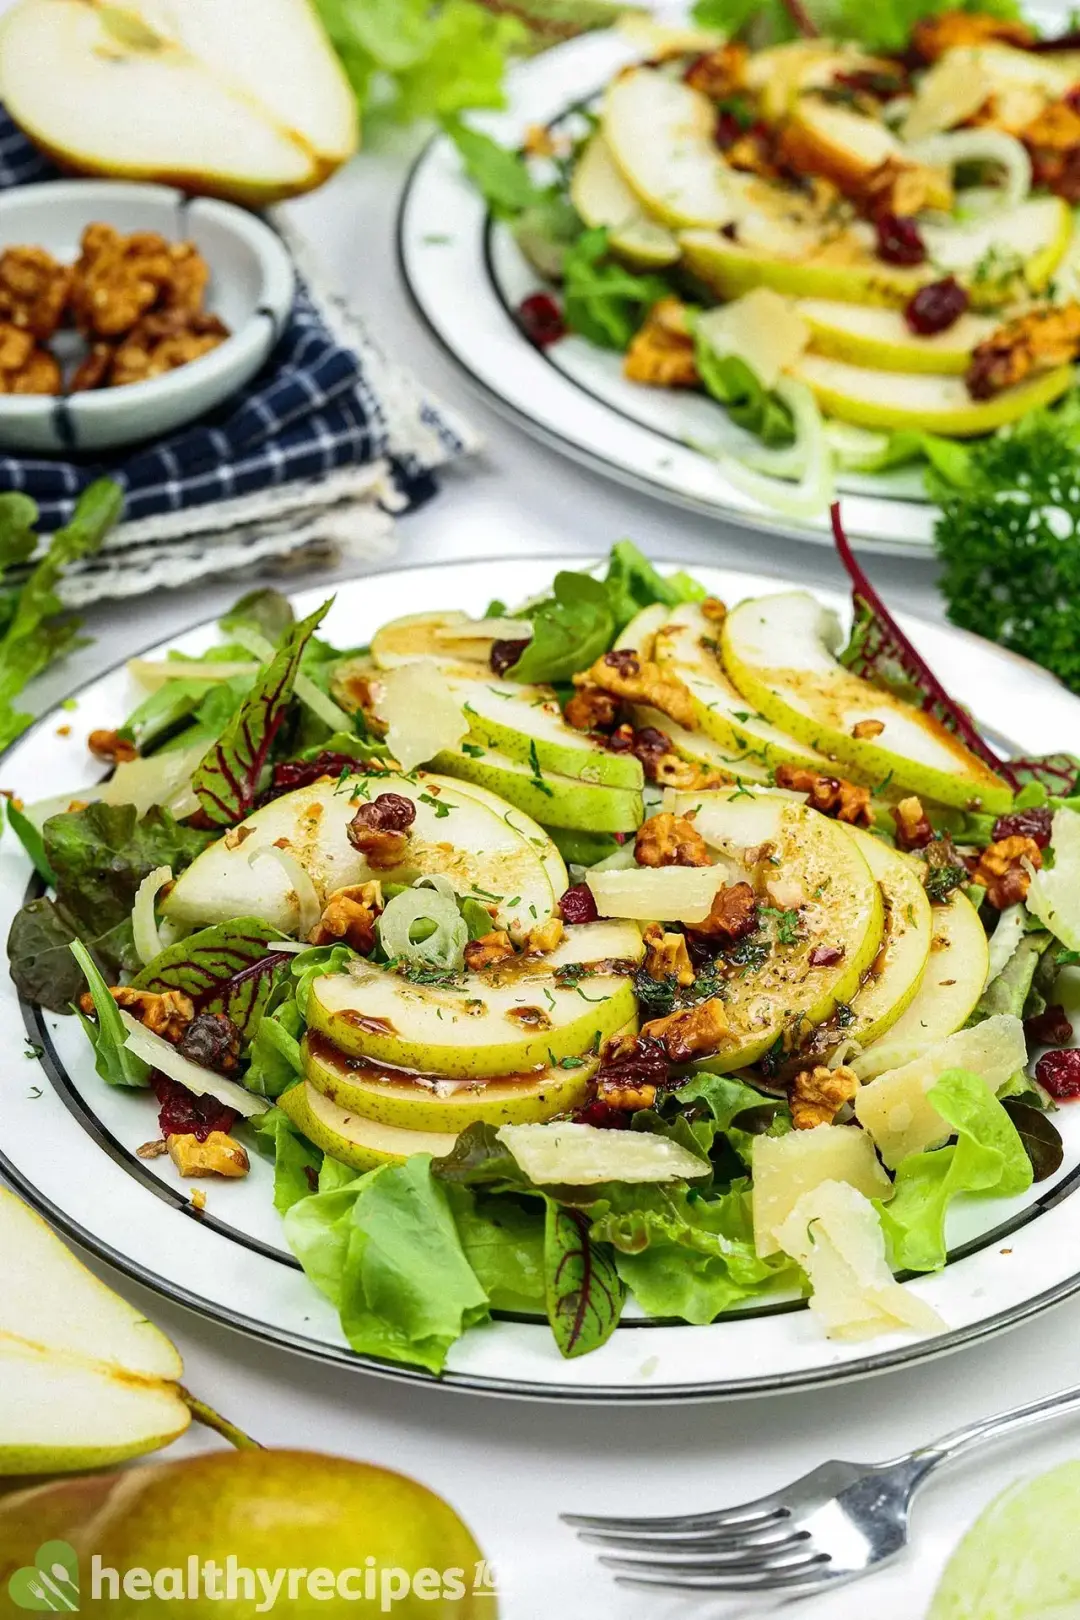 How to Store Leftovers Pear Salad